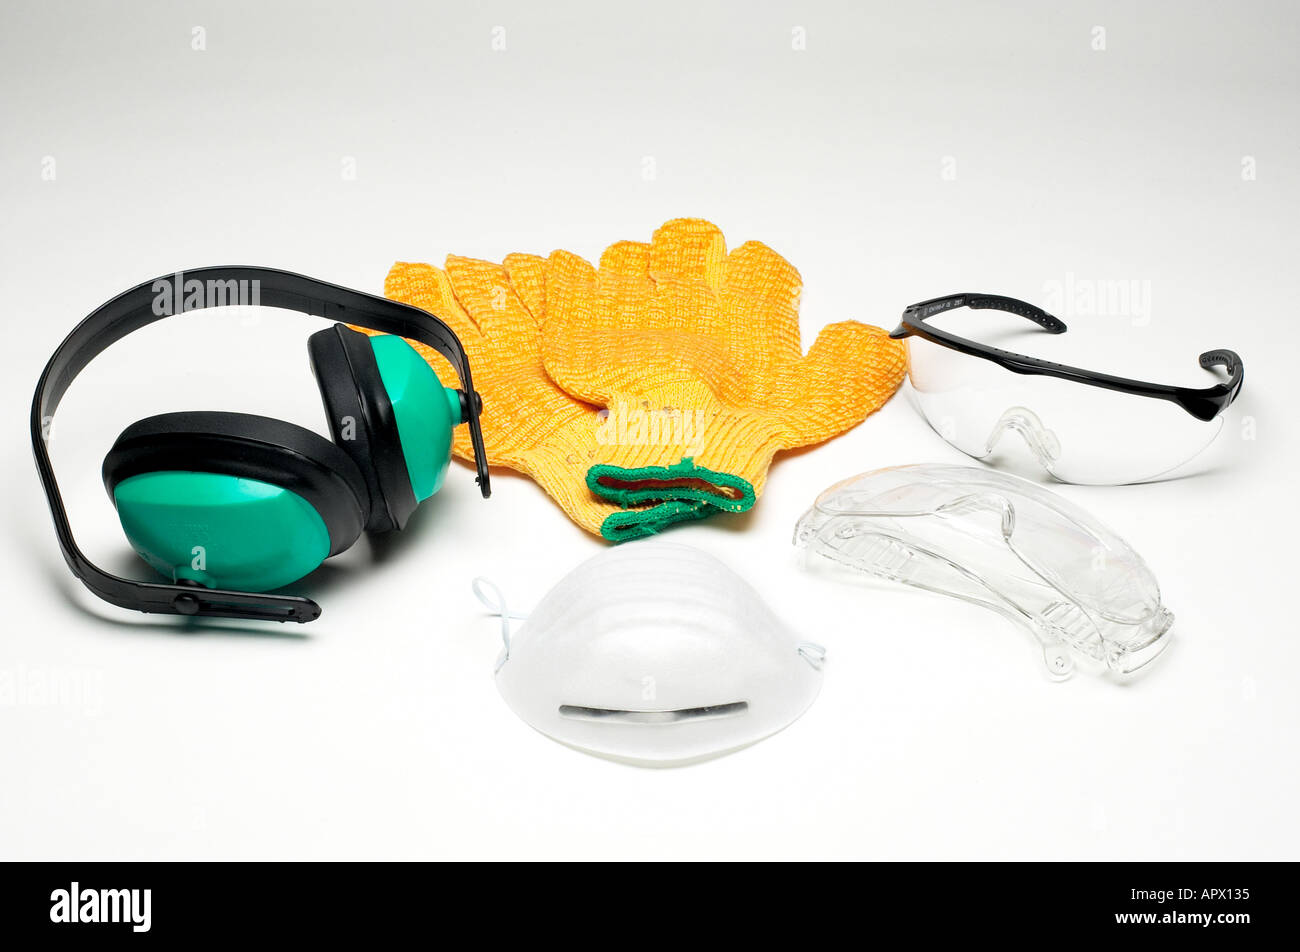 diy safety equipment collection Stock Photo